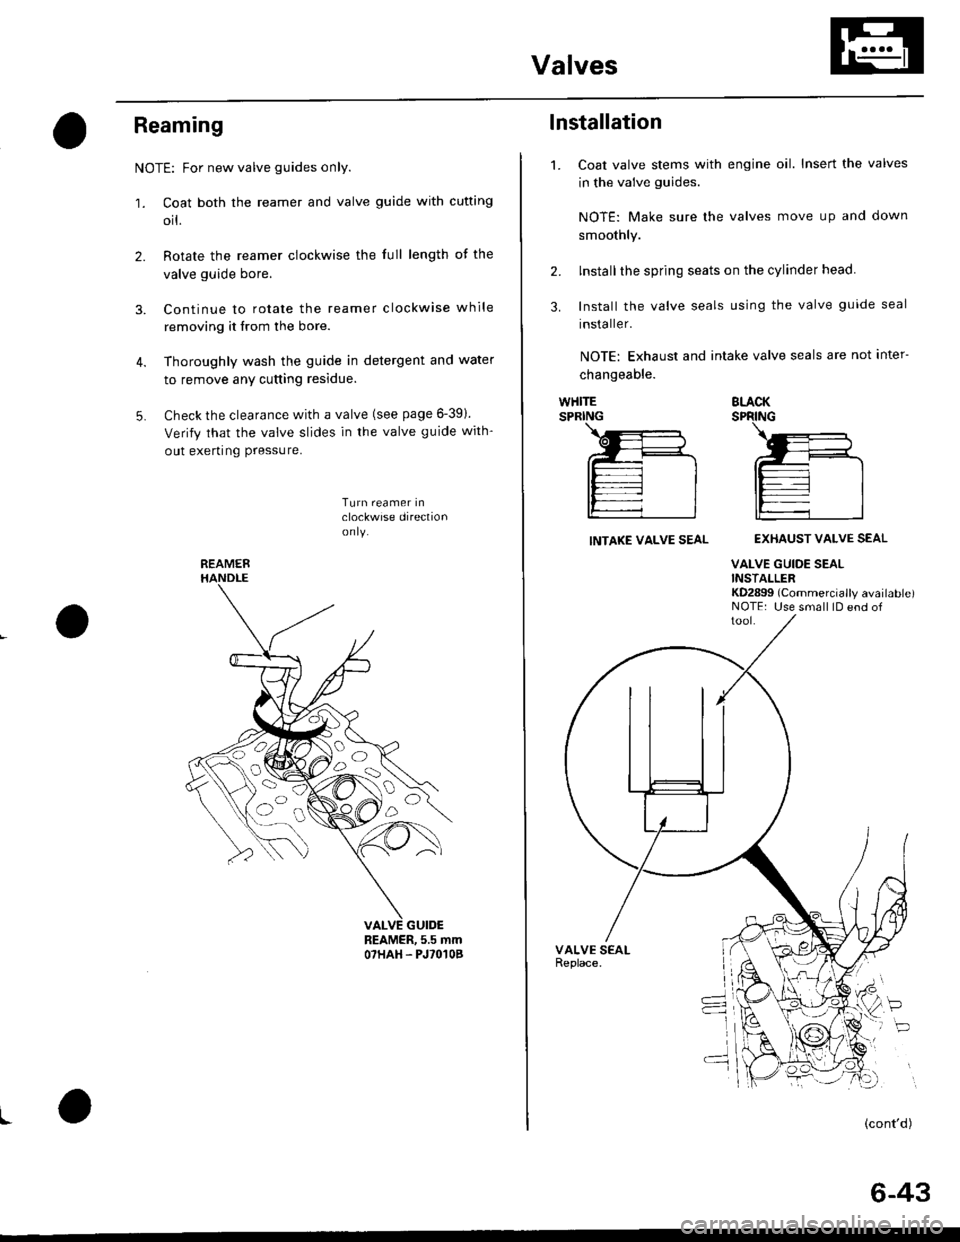 HONDA CIVIC 1999 6.G Owners Manual Valves
Reaming
NOTE: For new valve guides only.
1. Coat both the reamer and valve guide with cufting
orl.
2. Rotate the reamer clockwise the full length of the
valve guide bore.
3. Continue to rotate 